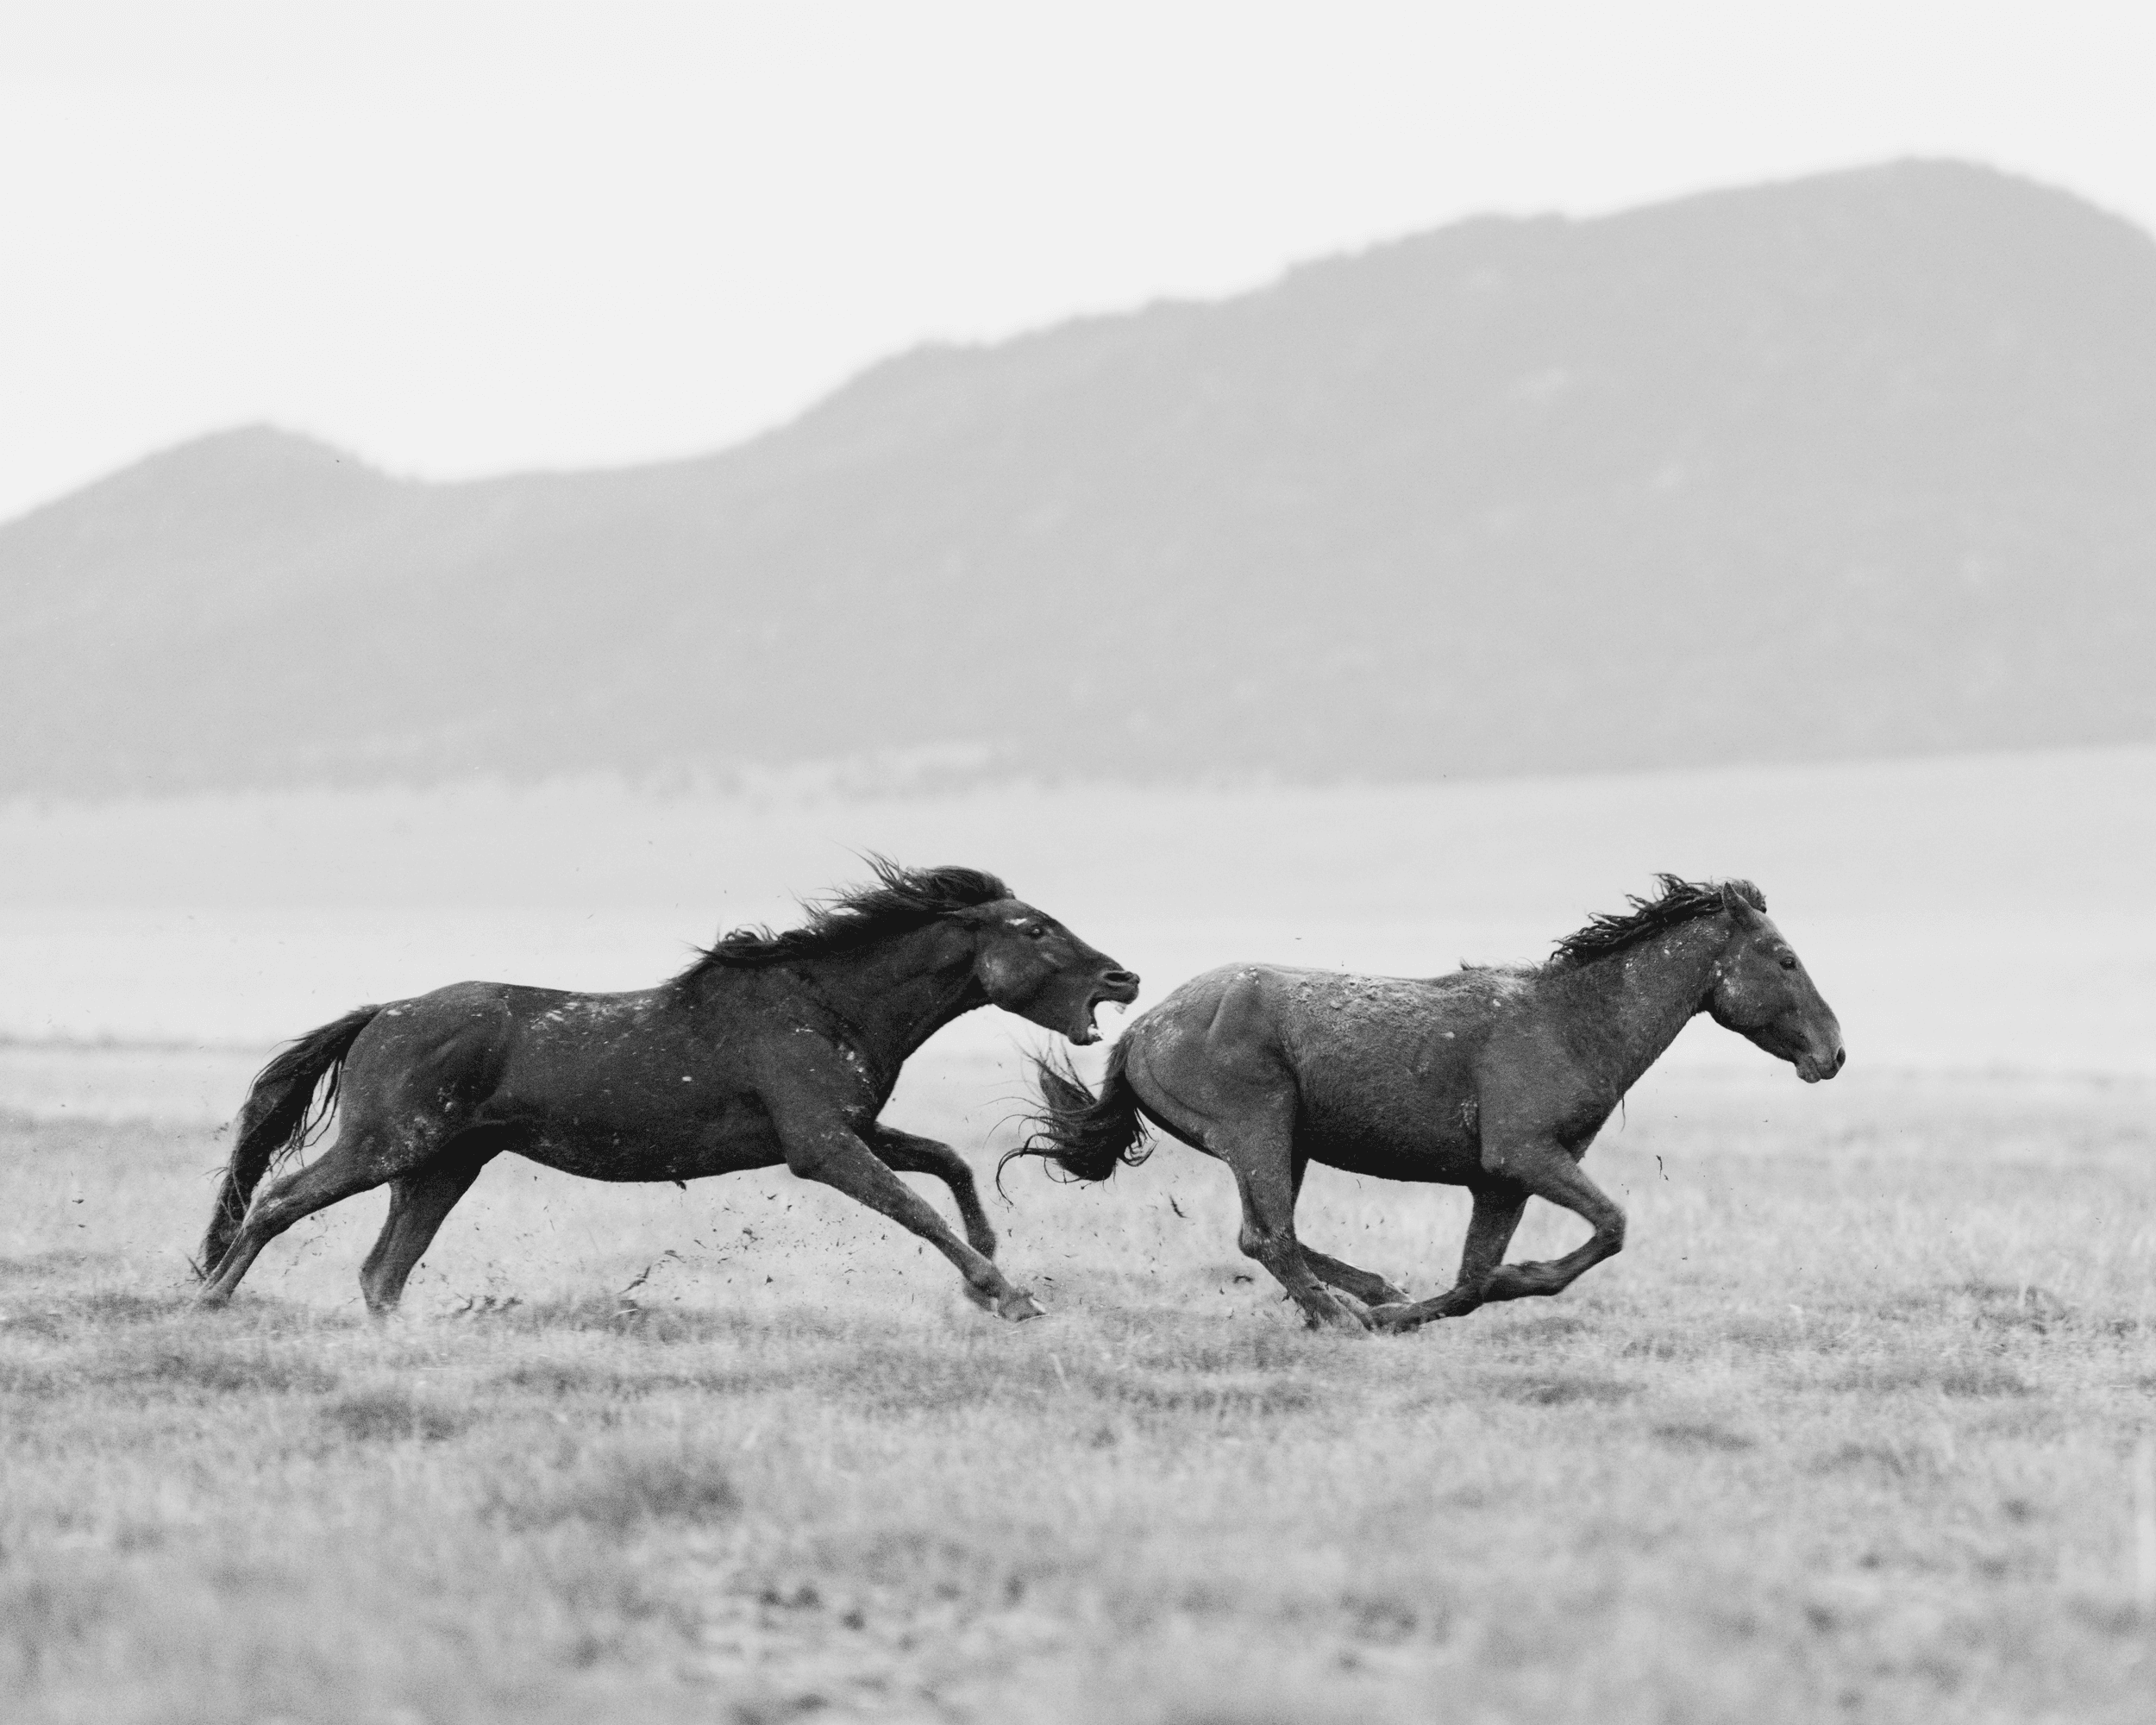 Wild Mustangs: The Chase